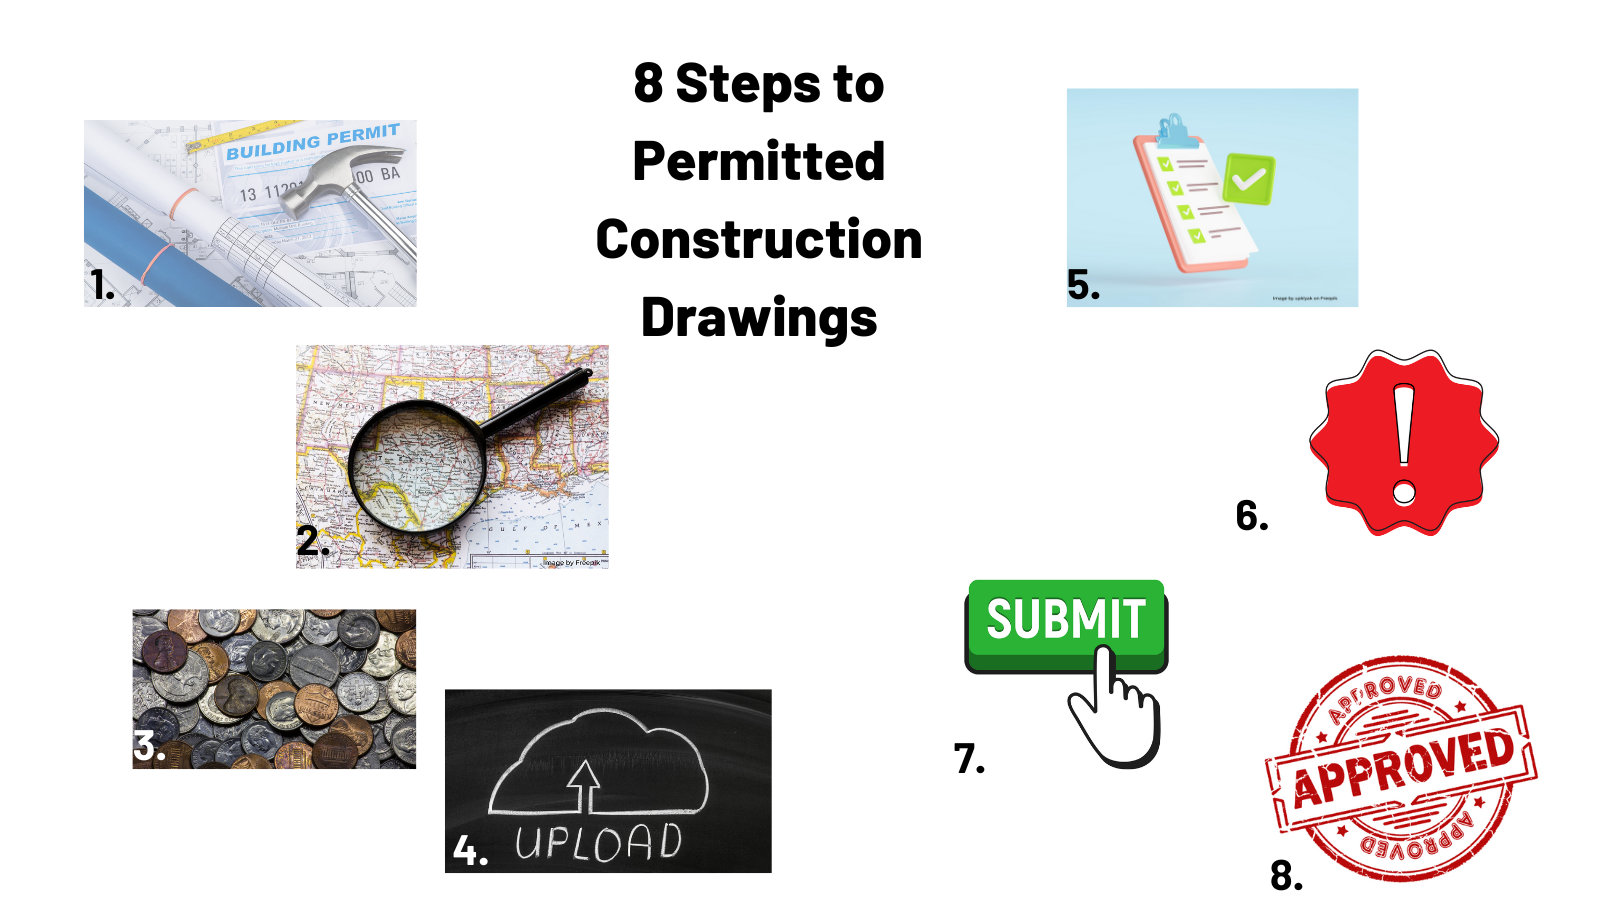 Step 4: Obtaining Permitted Construction Drawings